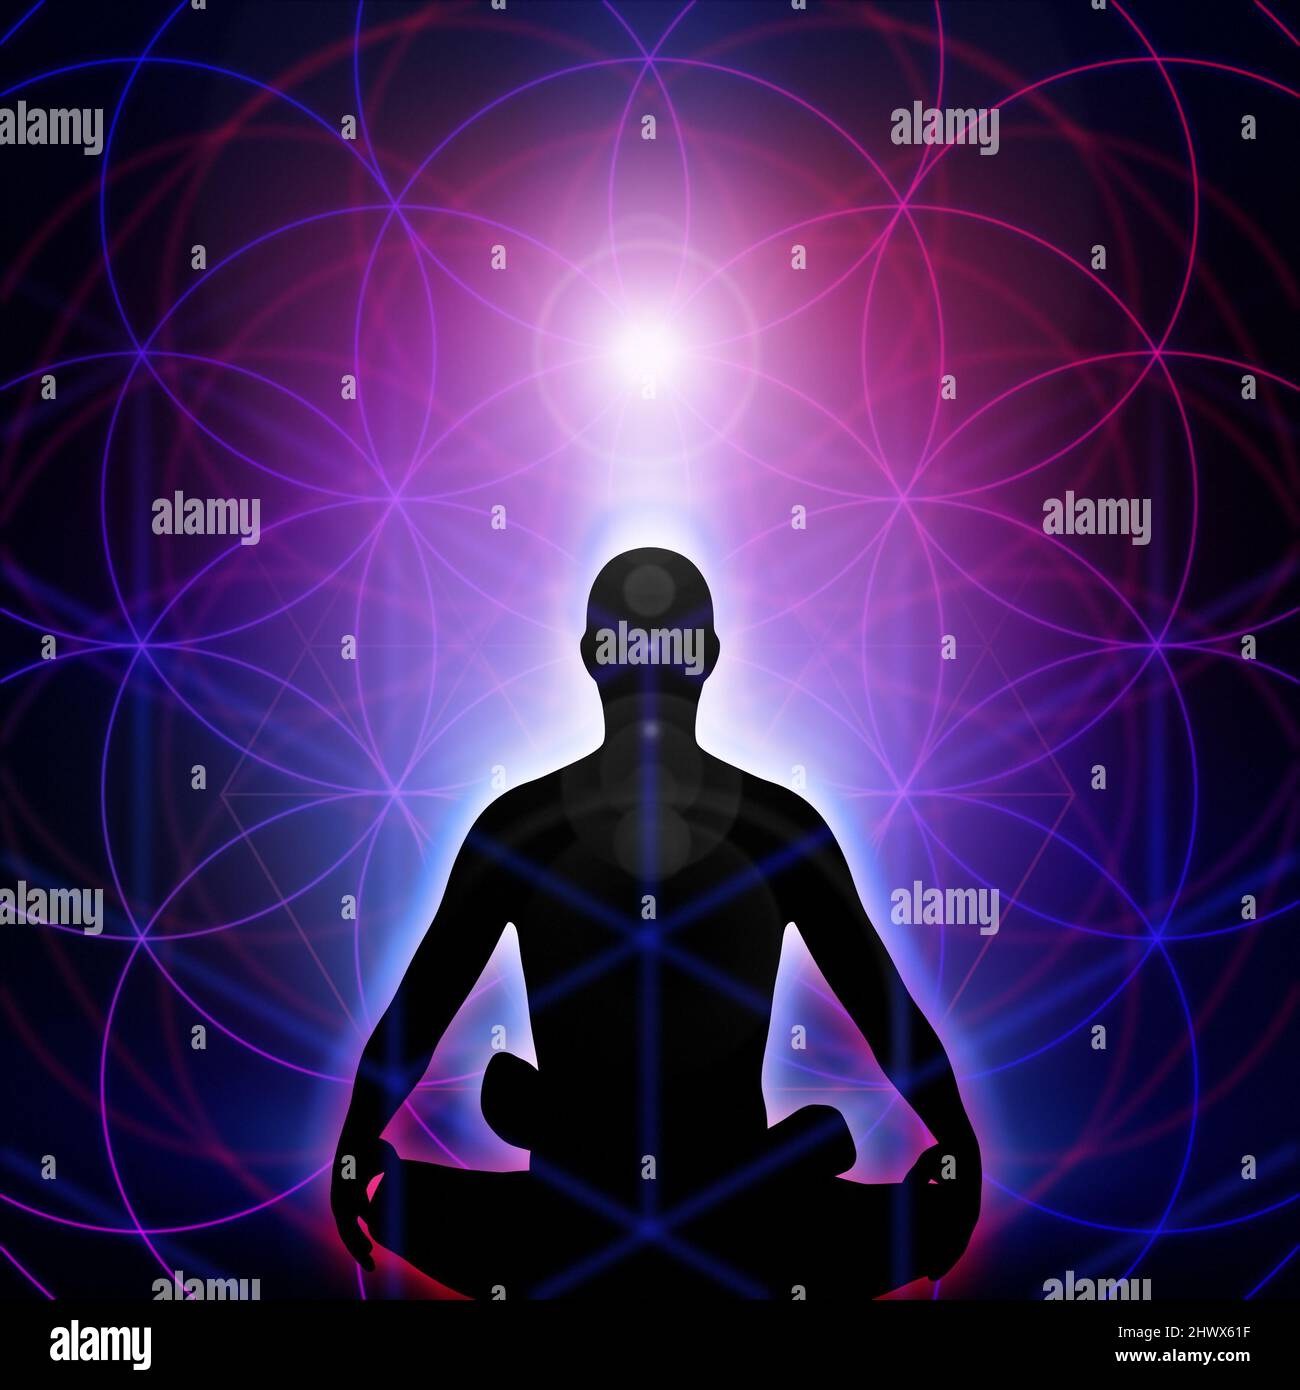 Sacral Geometry and Meditation - 3D Rendering Stock Photo